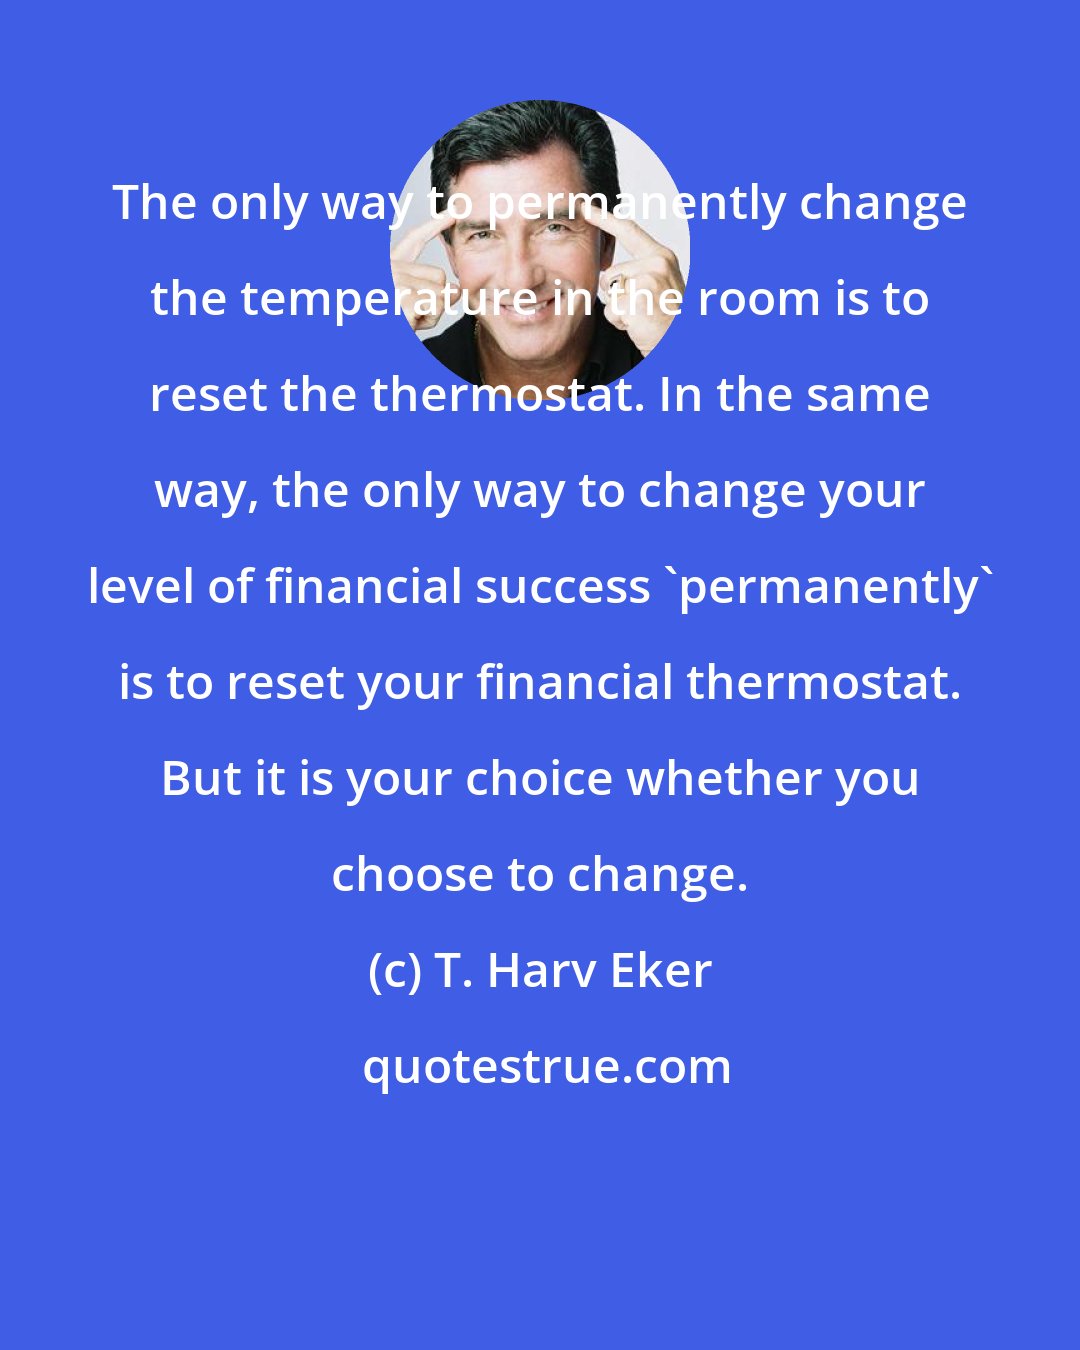 T. Harv Eker: The only way to permanently change the temperature in the room is to reset the thermostat. In the same way, the only way to change your level of financial success 'permanently' is to reset your financial thermostat. But it is your choice whether you choose to change.